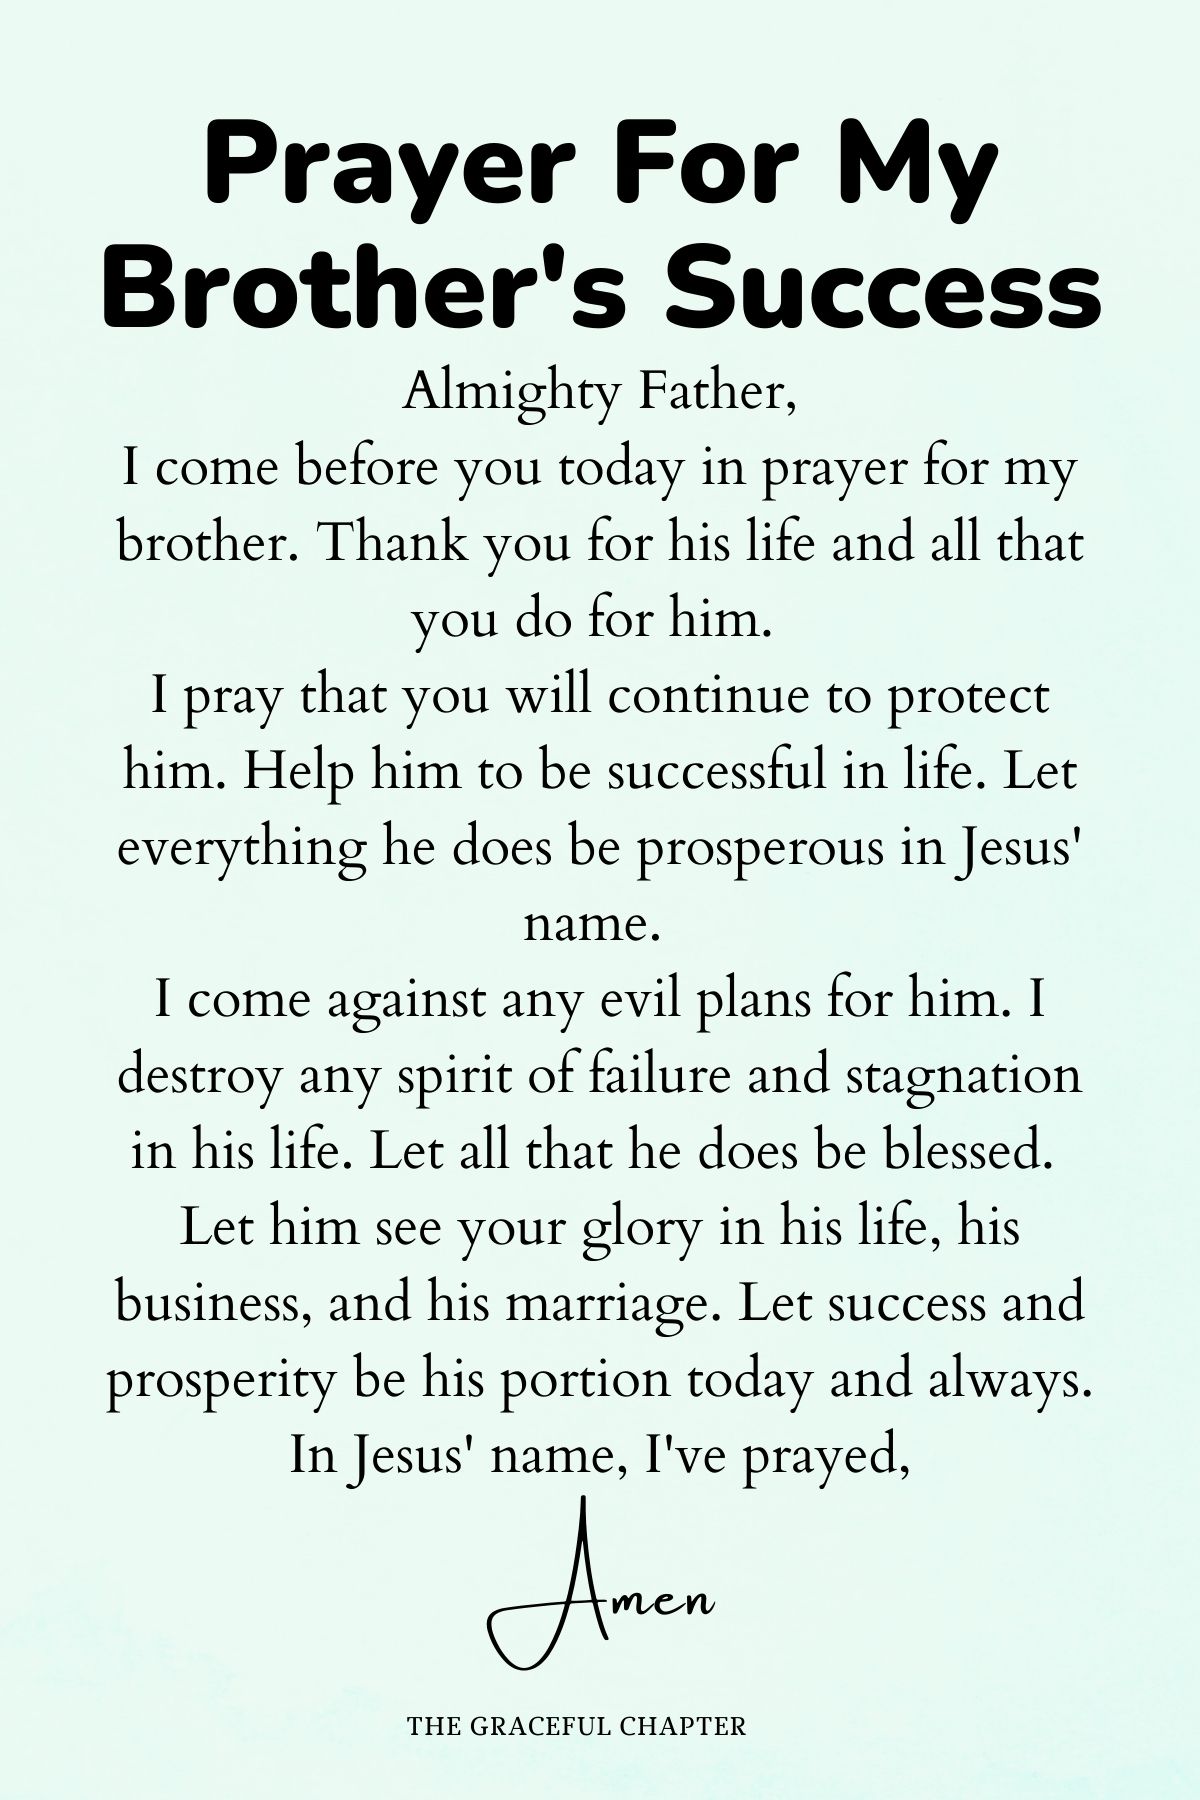 Prayer for my brother's success